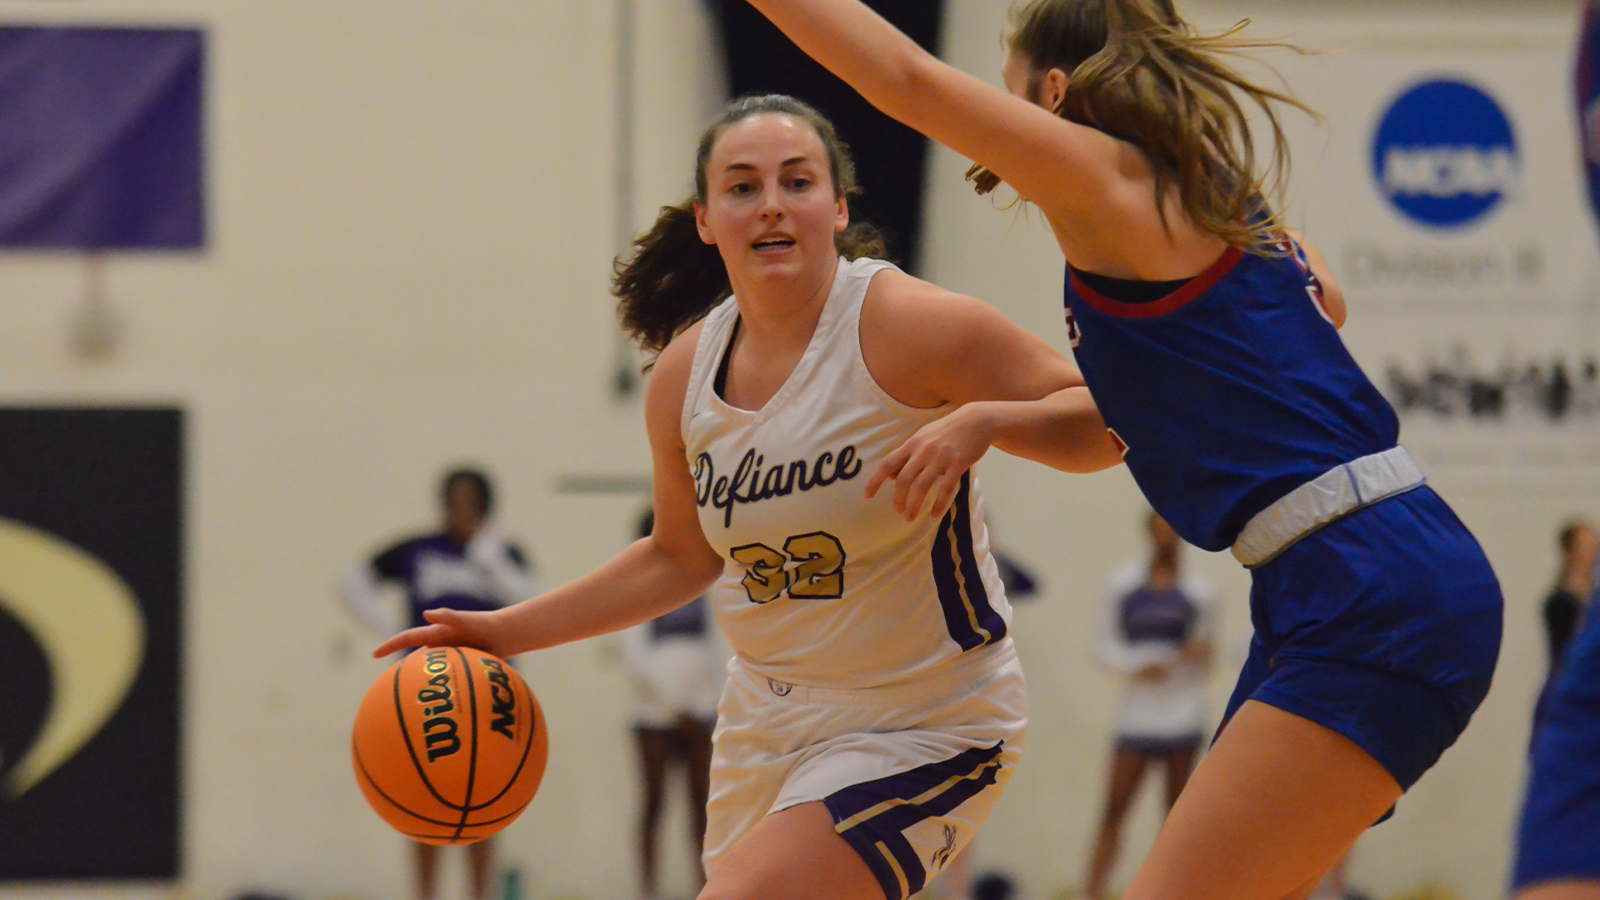 Yellow Jackets wallop Manchester on Wednesday behind 31-point night by Steinbrunner